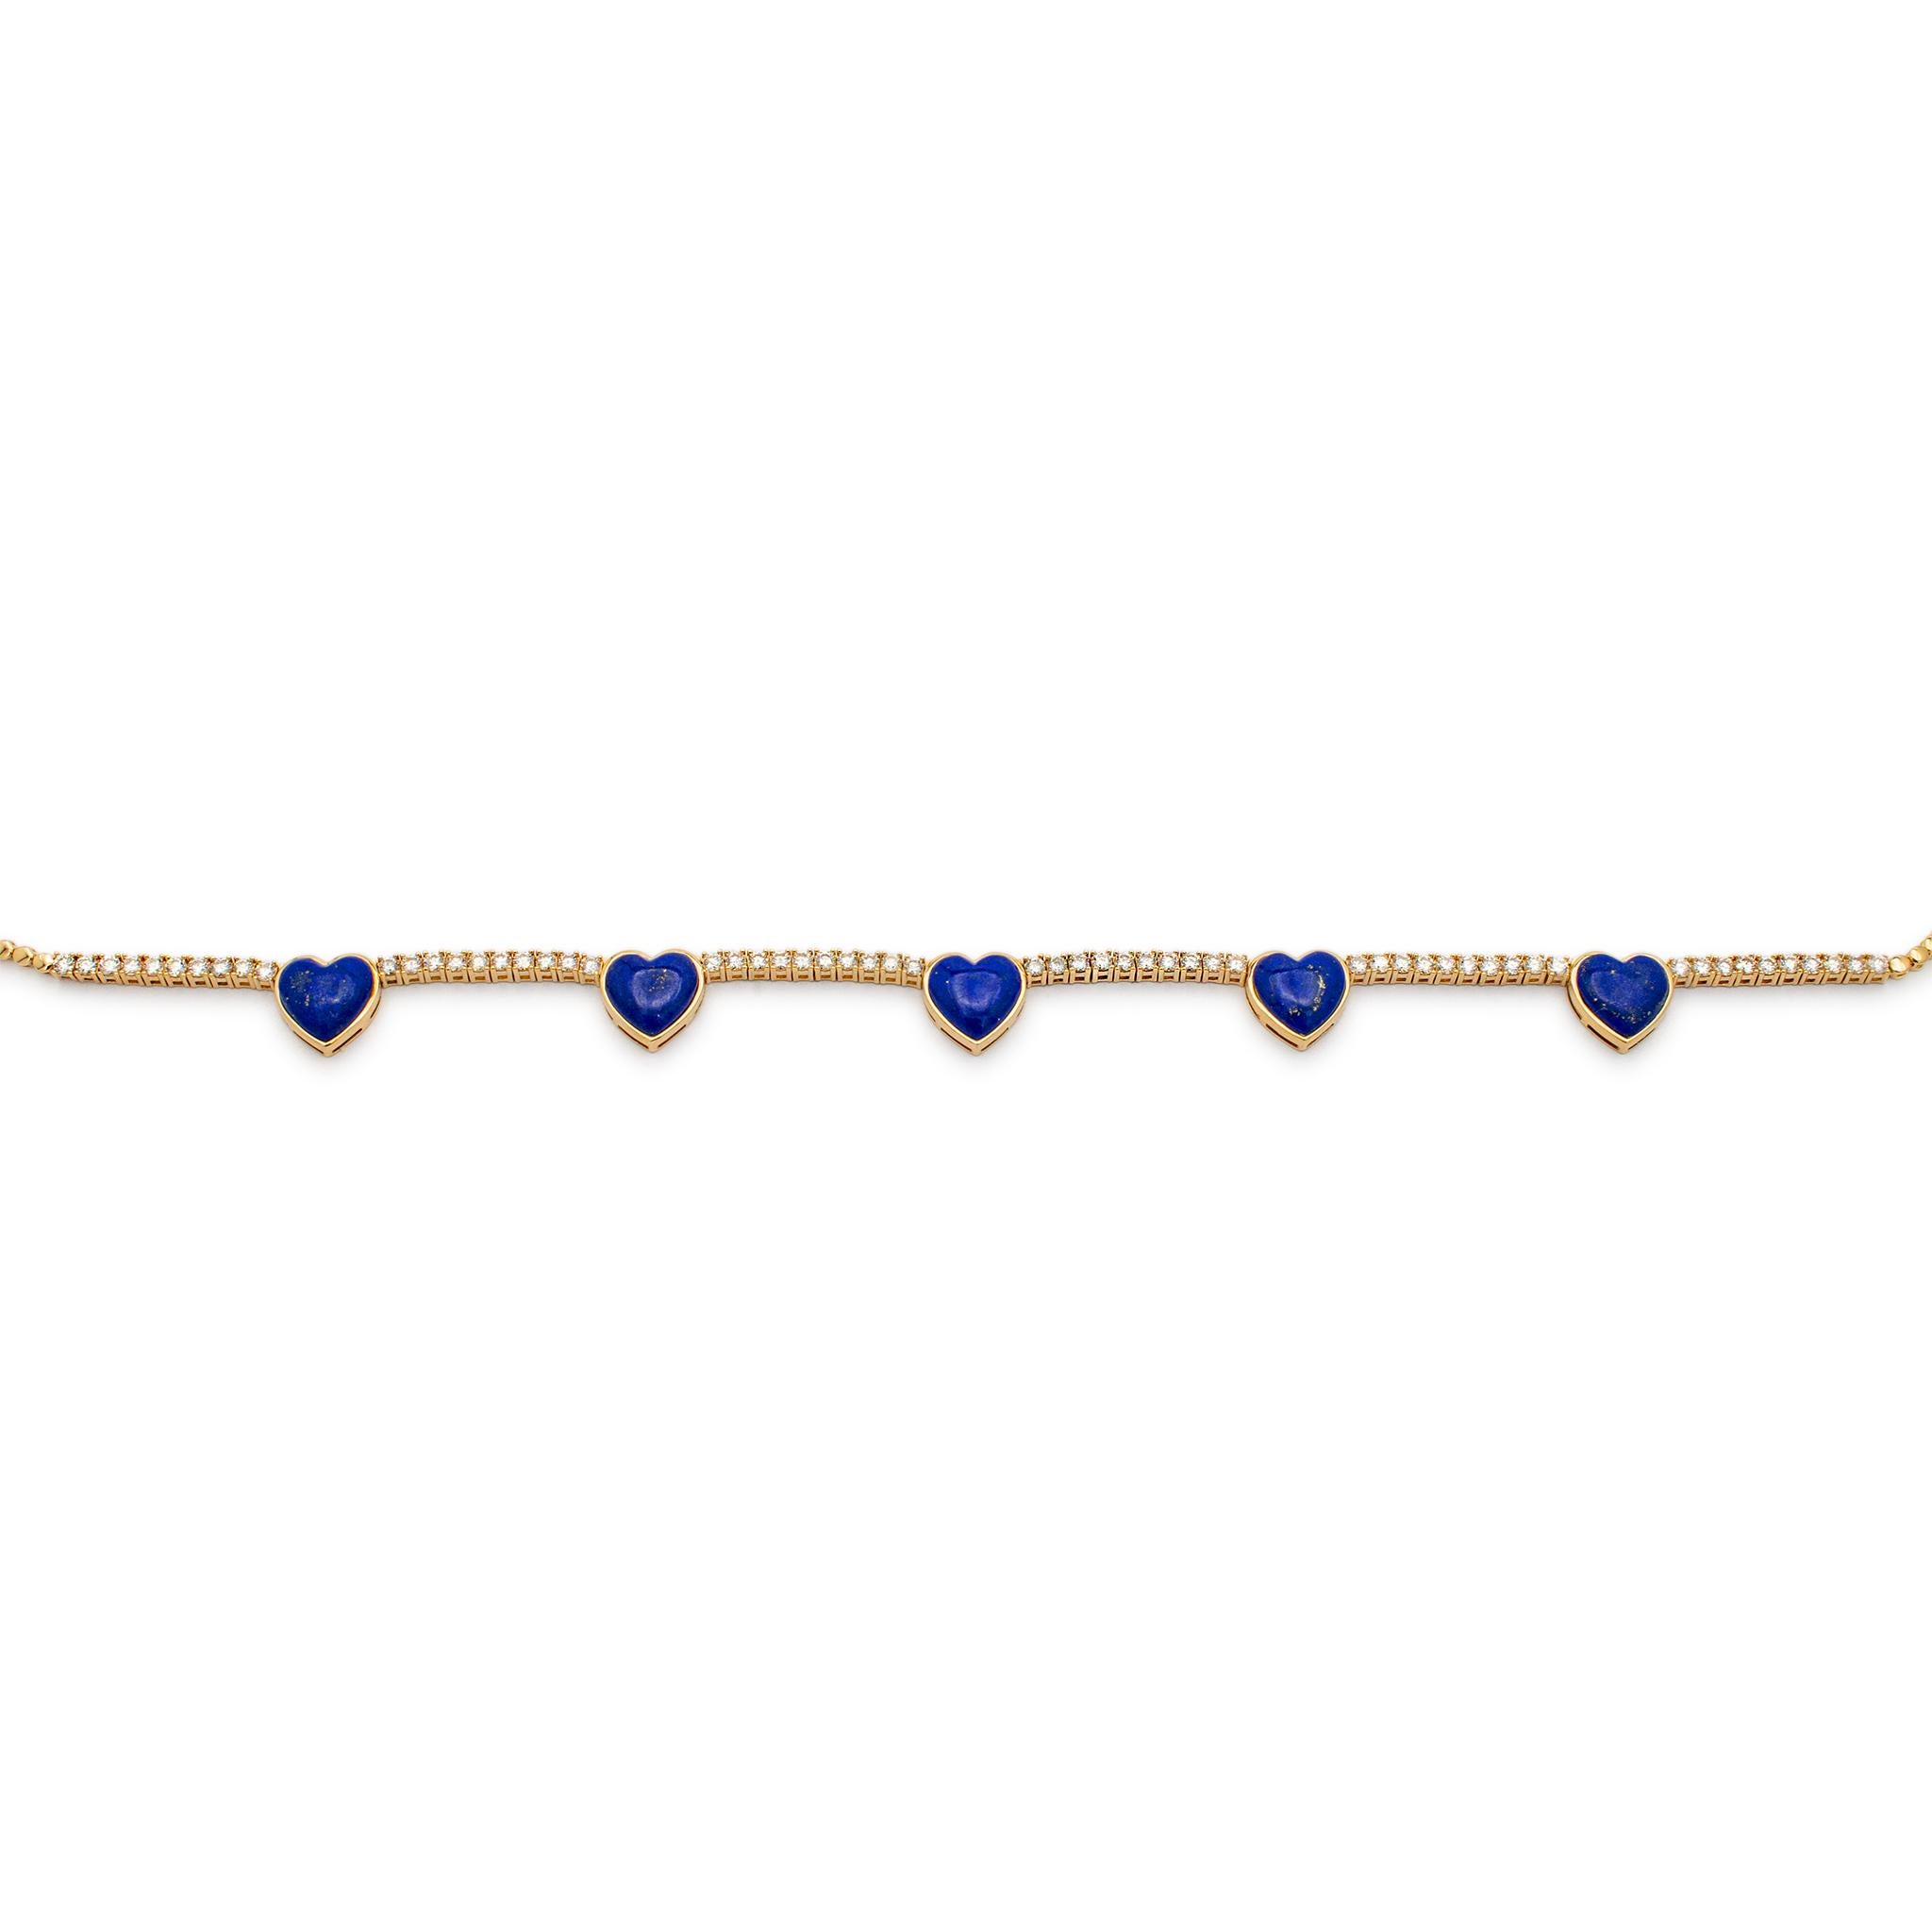 Ladies 14K Yellow Gold Heart Lapis Lazuli Diamond Tennis Necklaces In Excellent Condition For Sale In Houston, TX